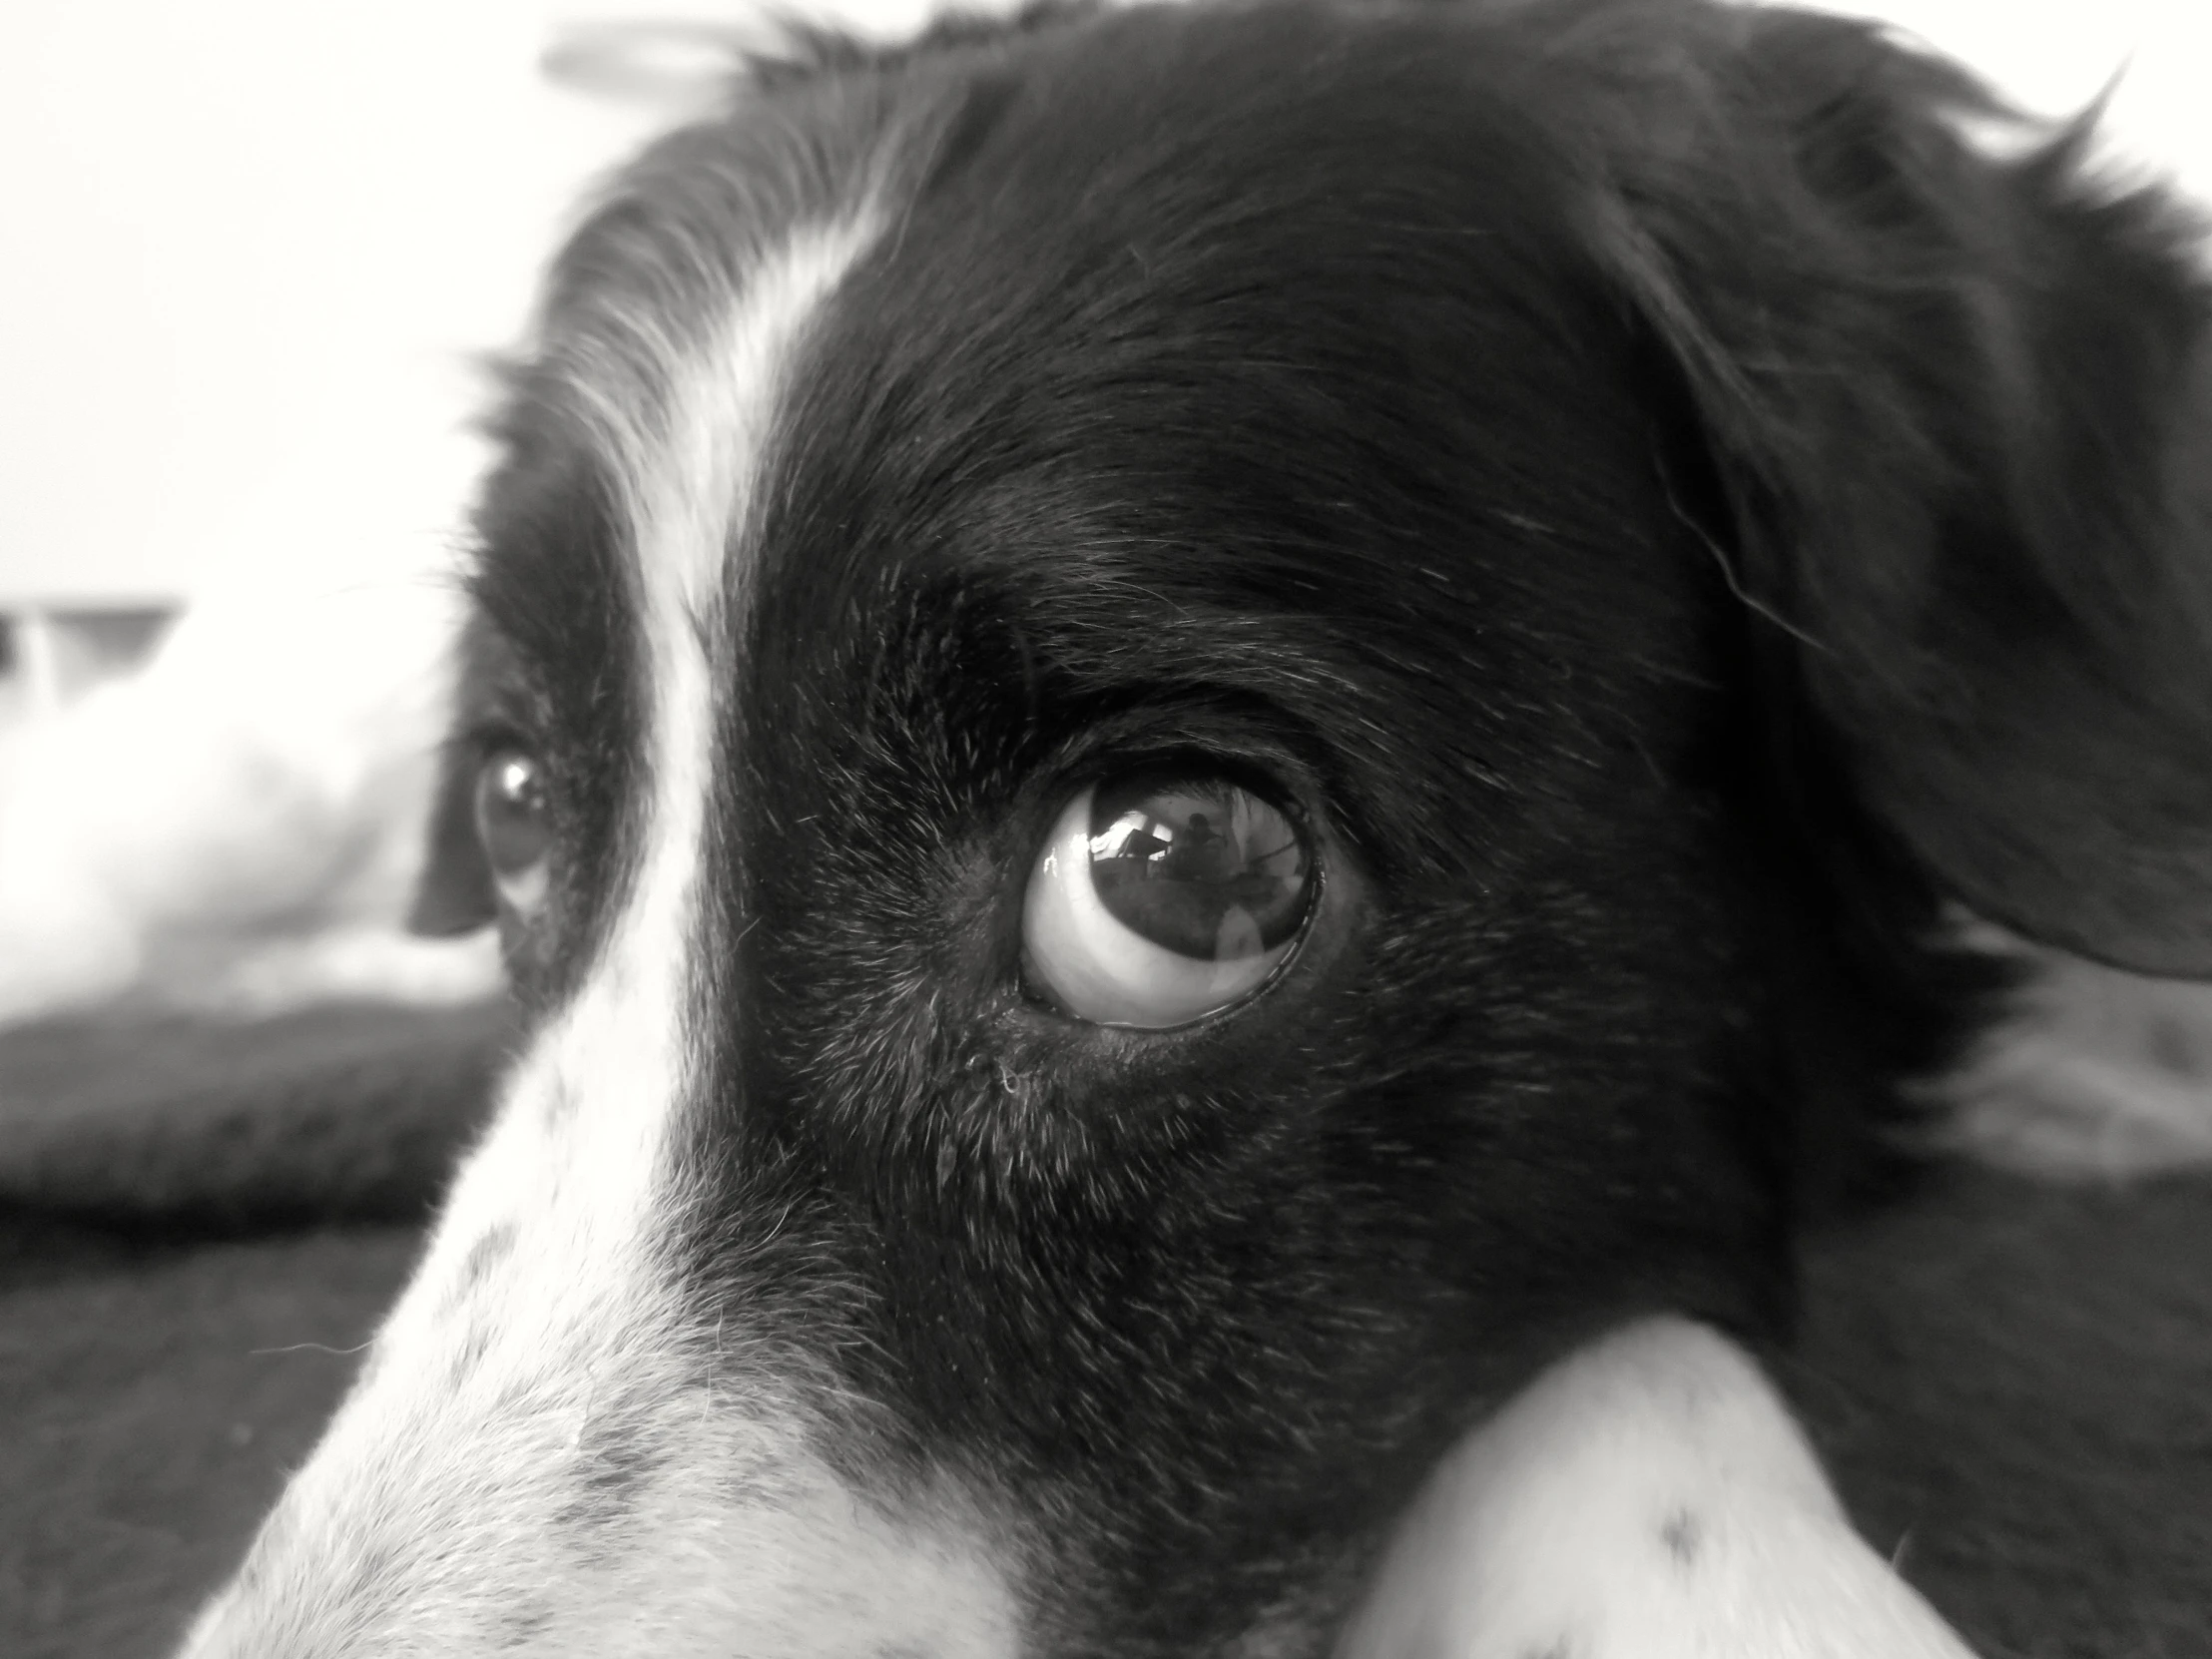 a close up po of a black and white dog's face